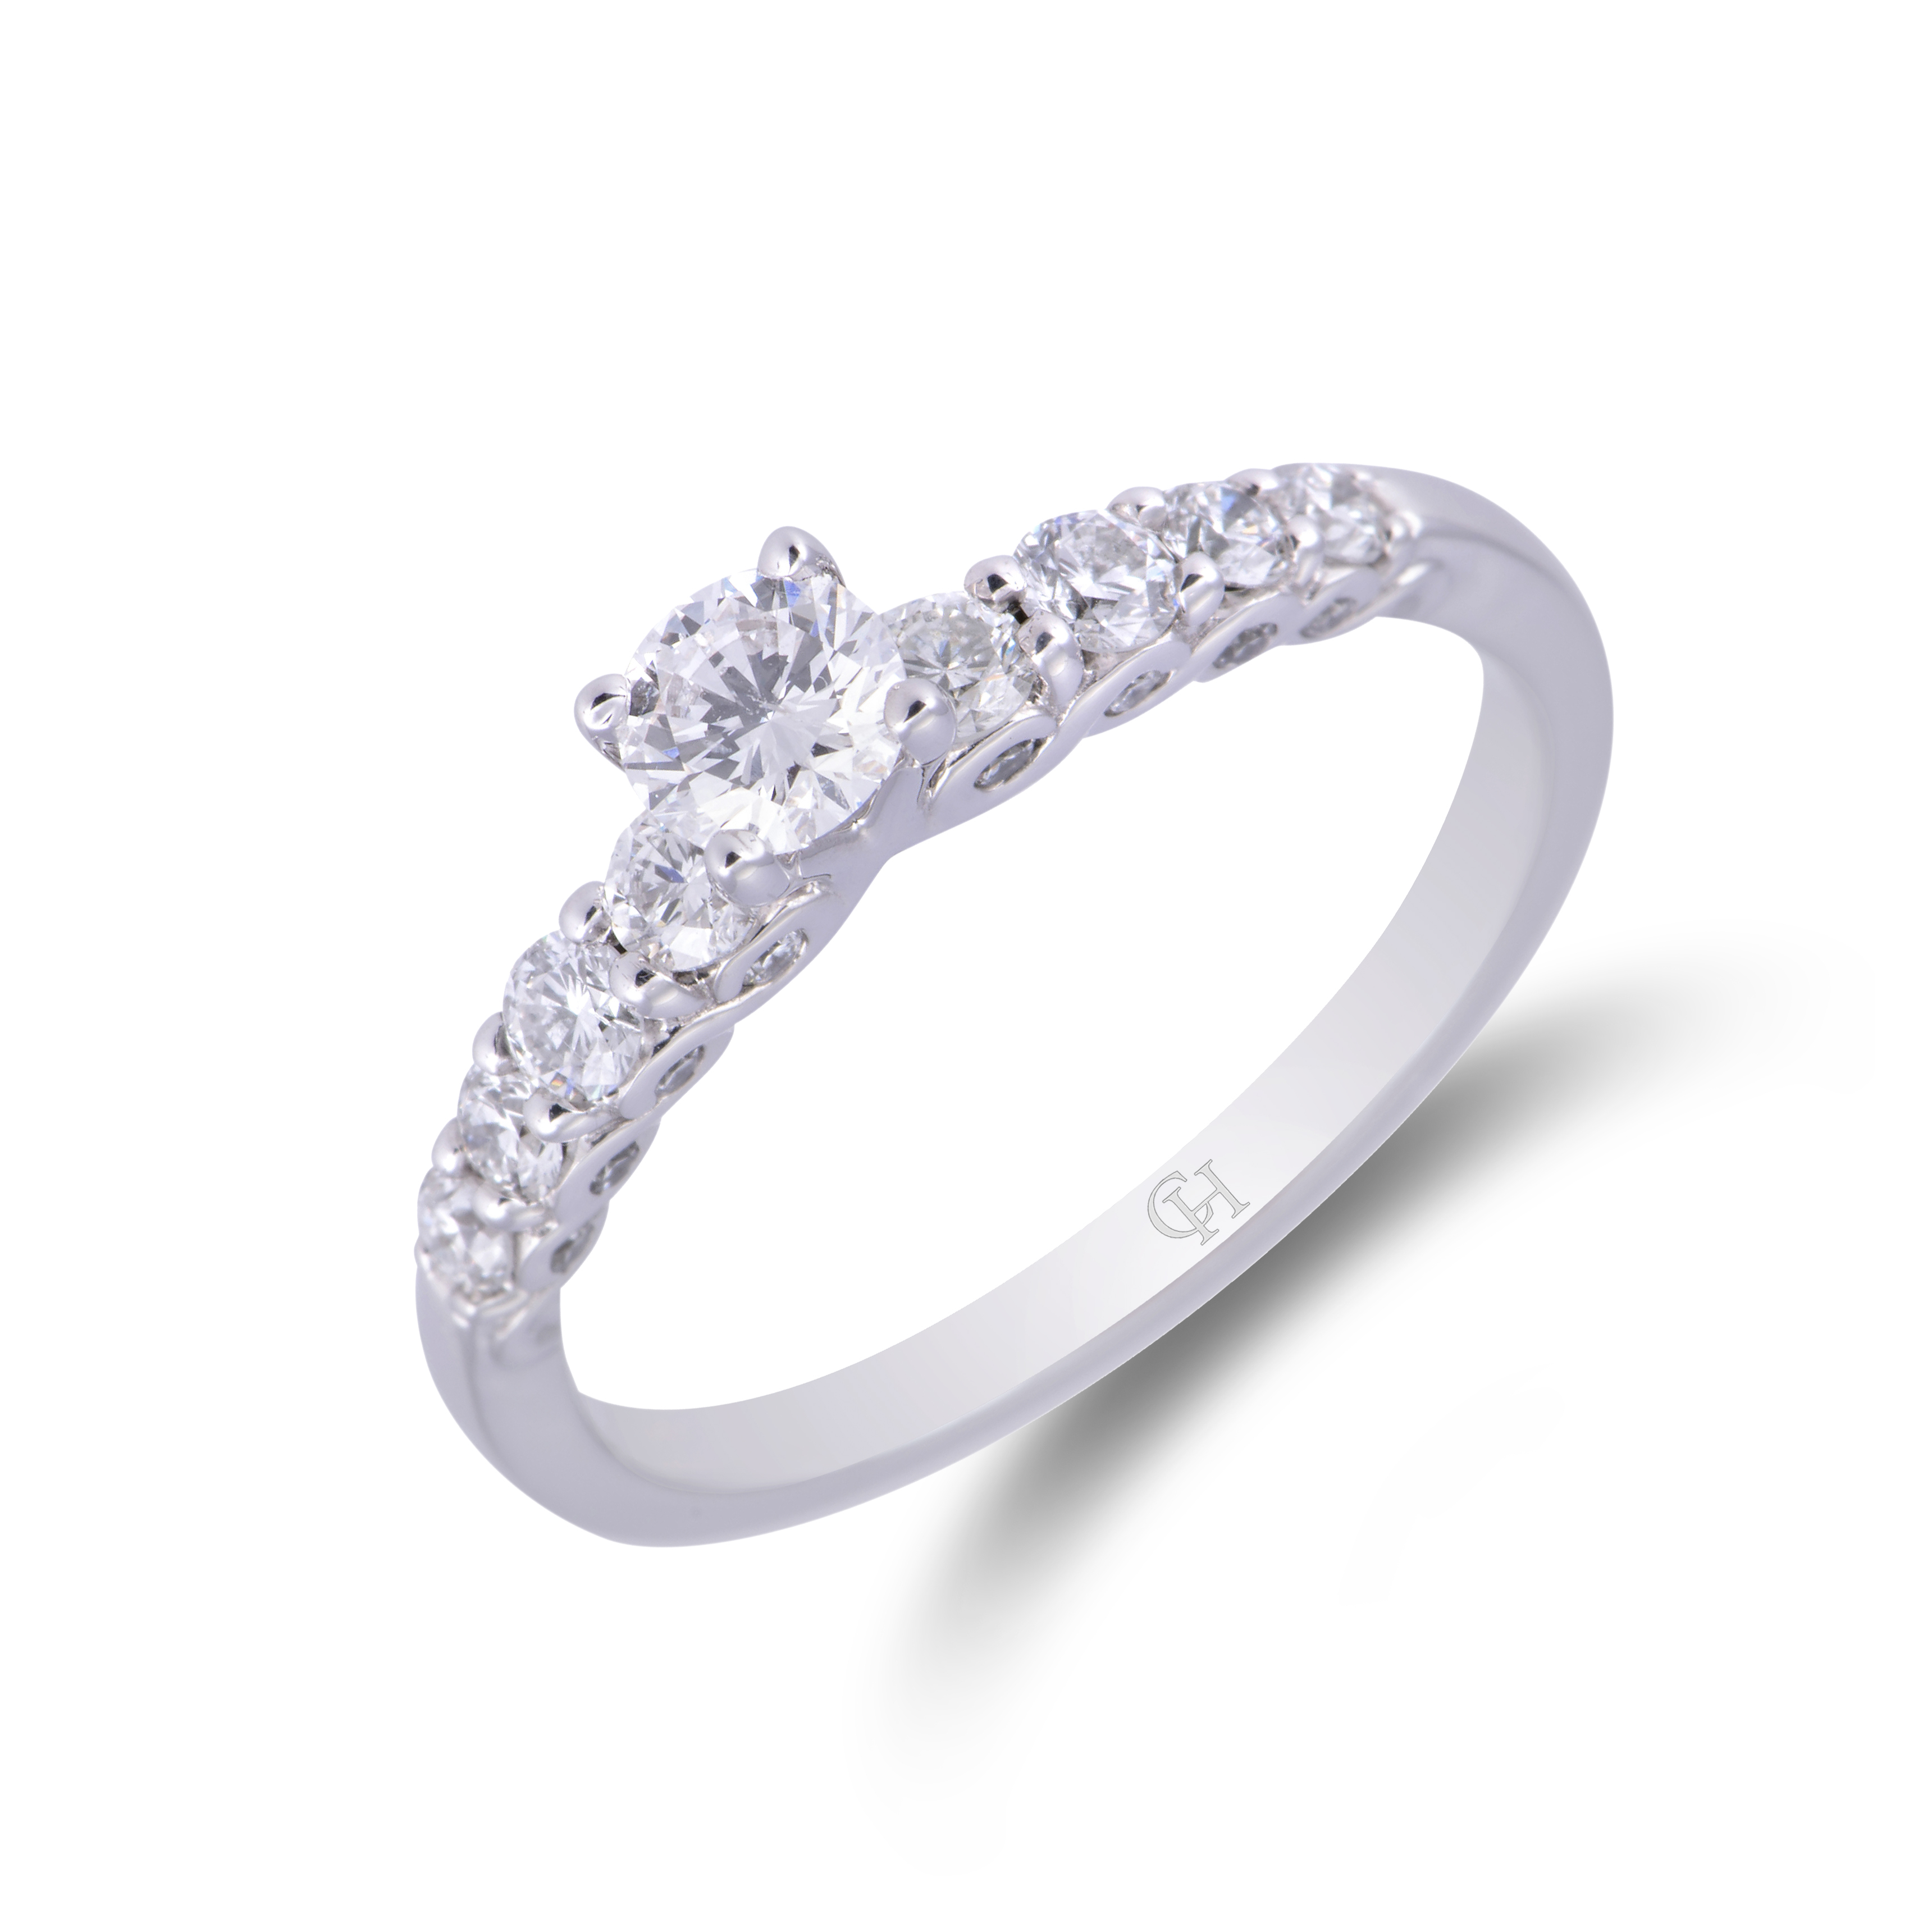 18ct White Gold Round Brilliant Diamond Solitaire with Diamond Shoulders, Approx. 0.80ct Total Weight